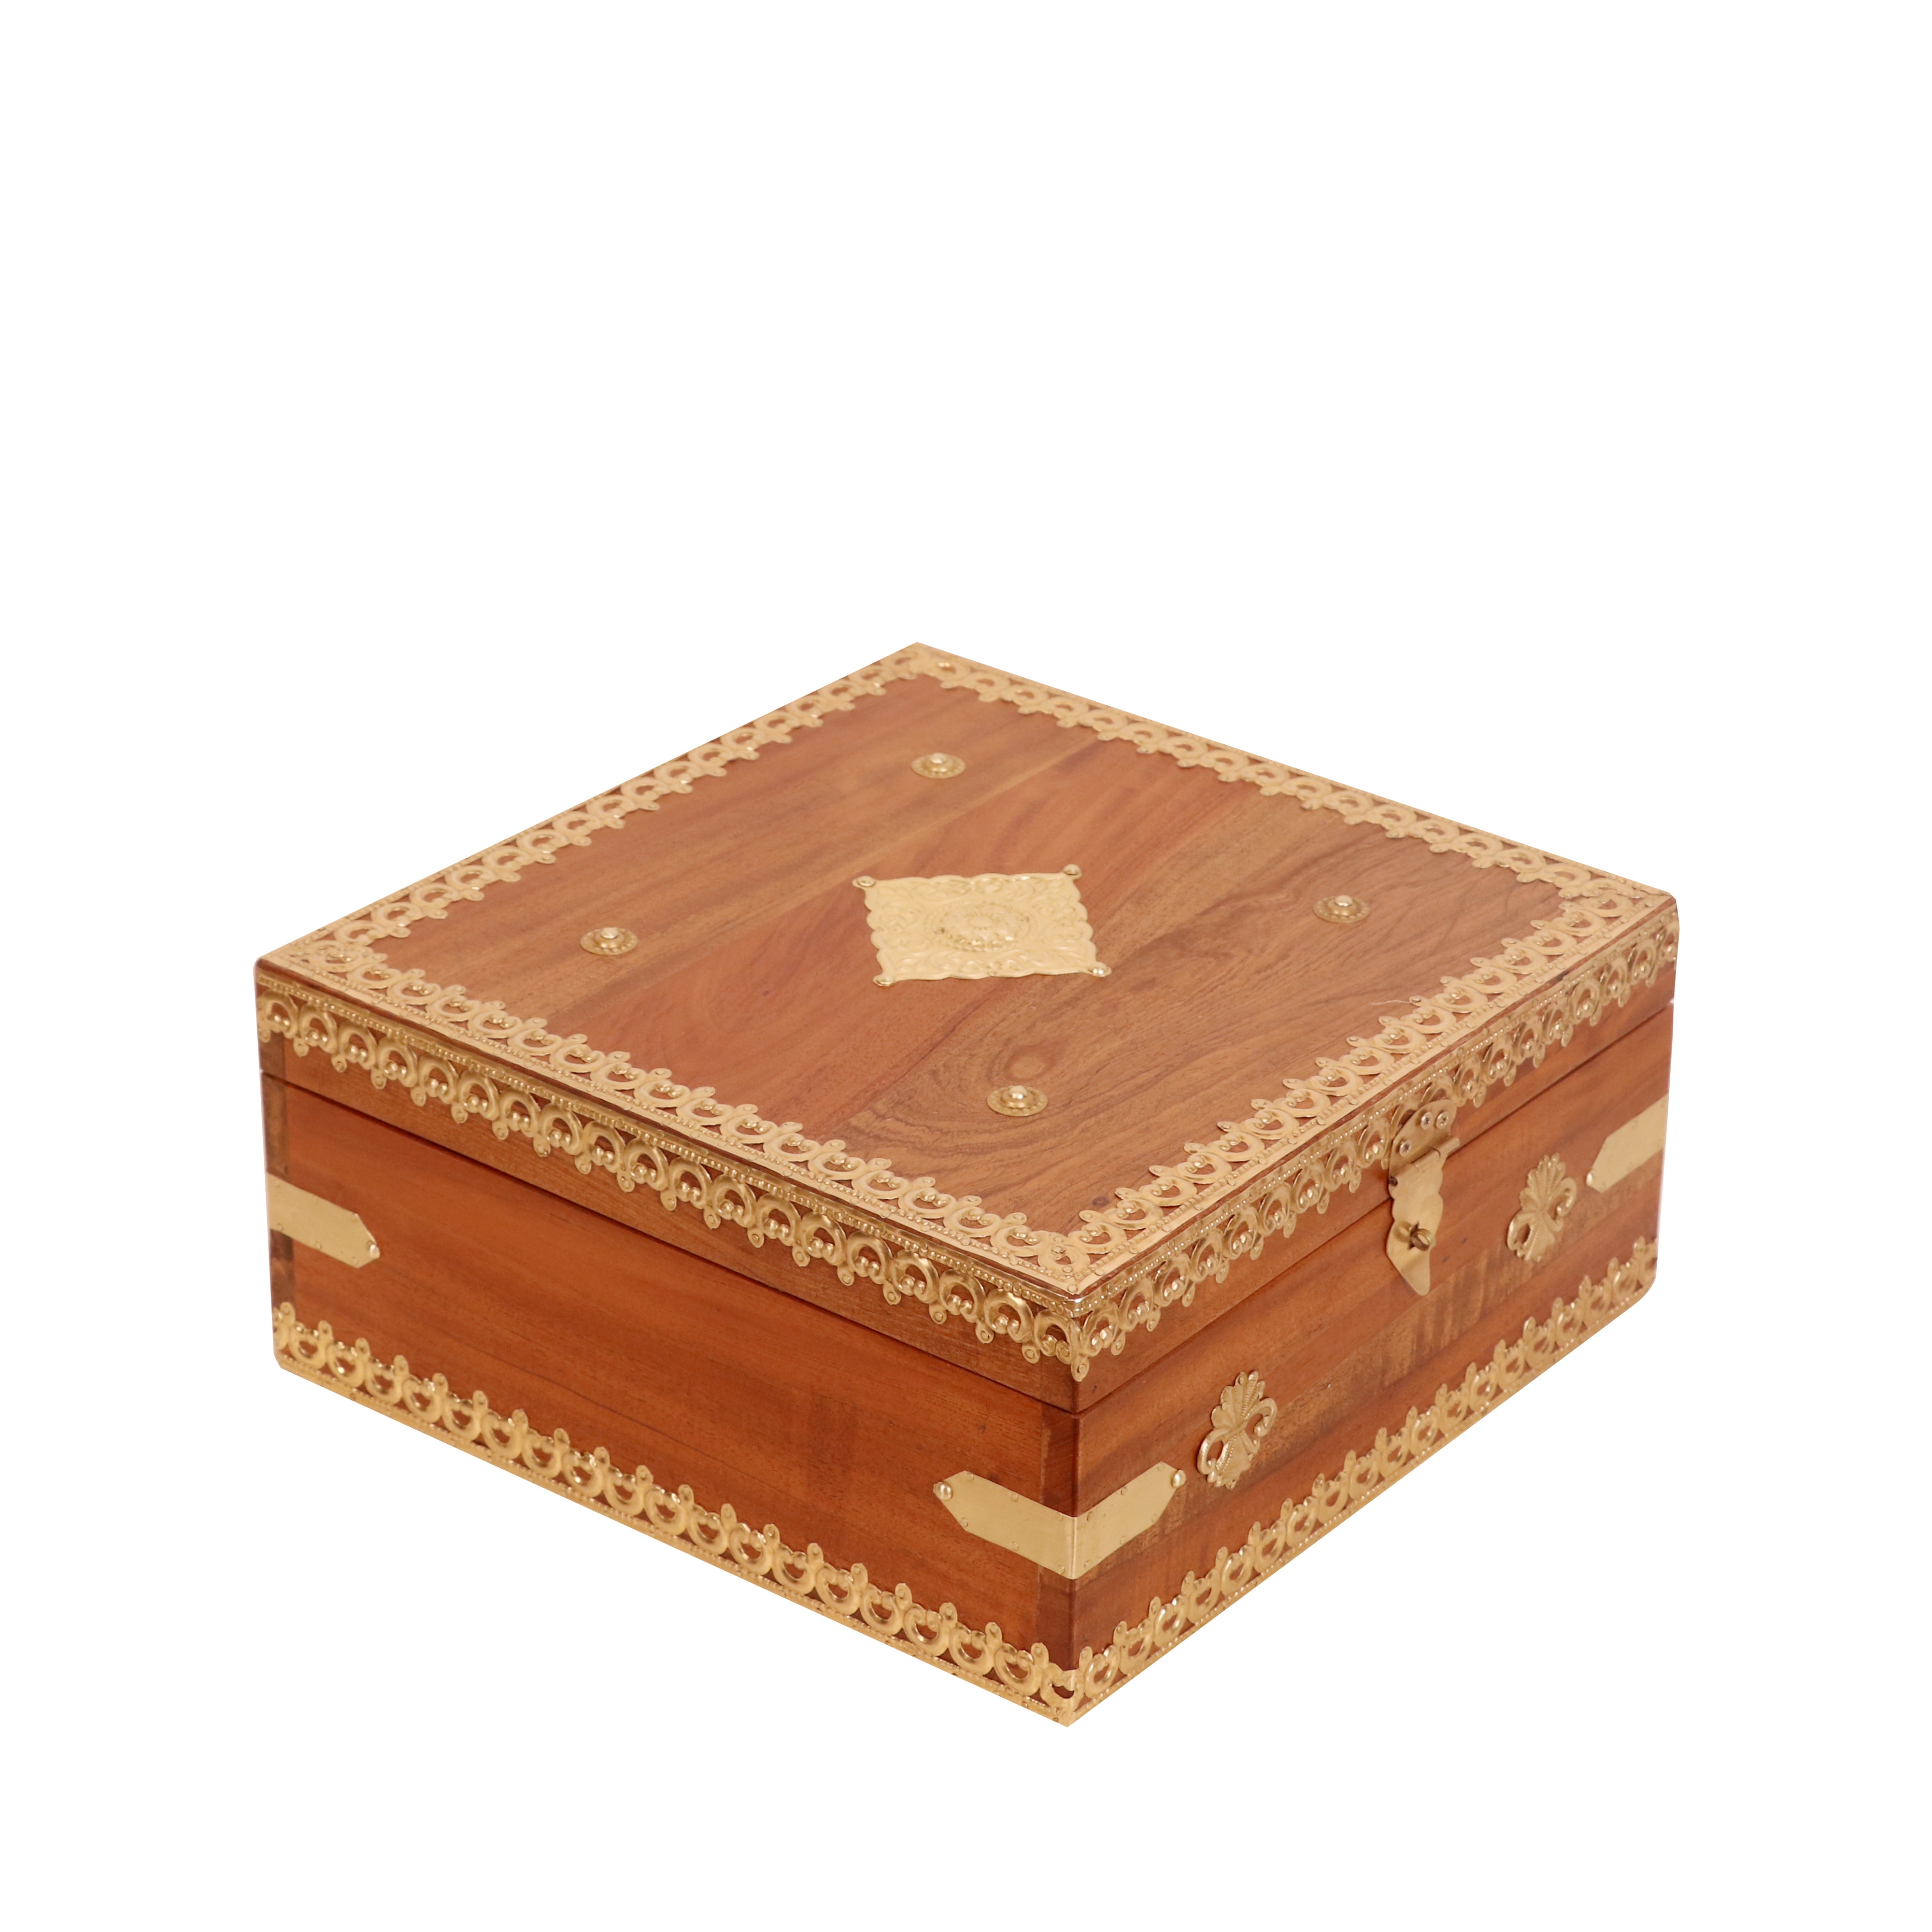 Solid wood Brass Square Box Wooden Box